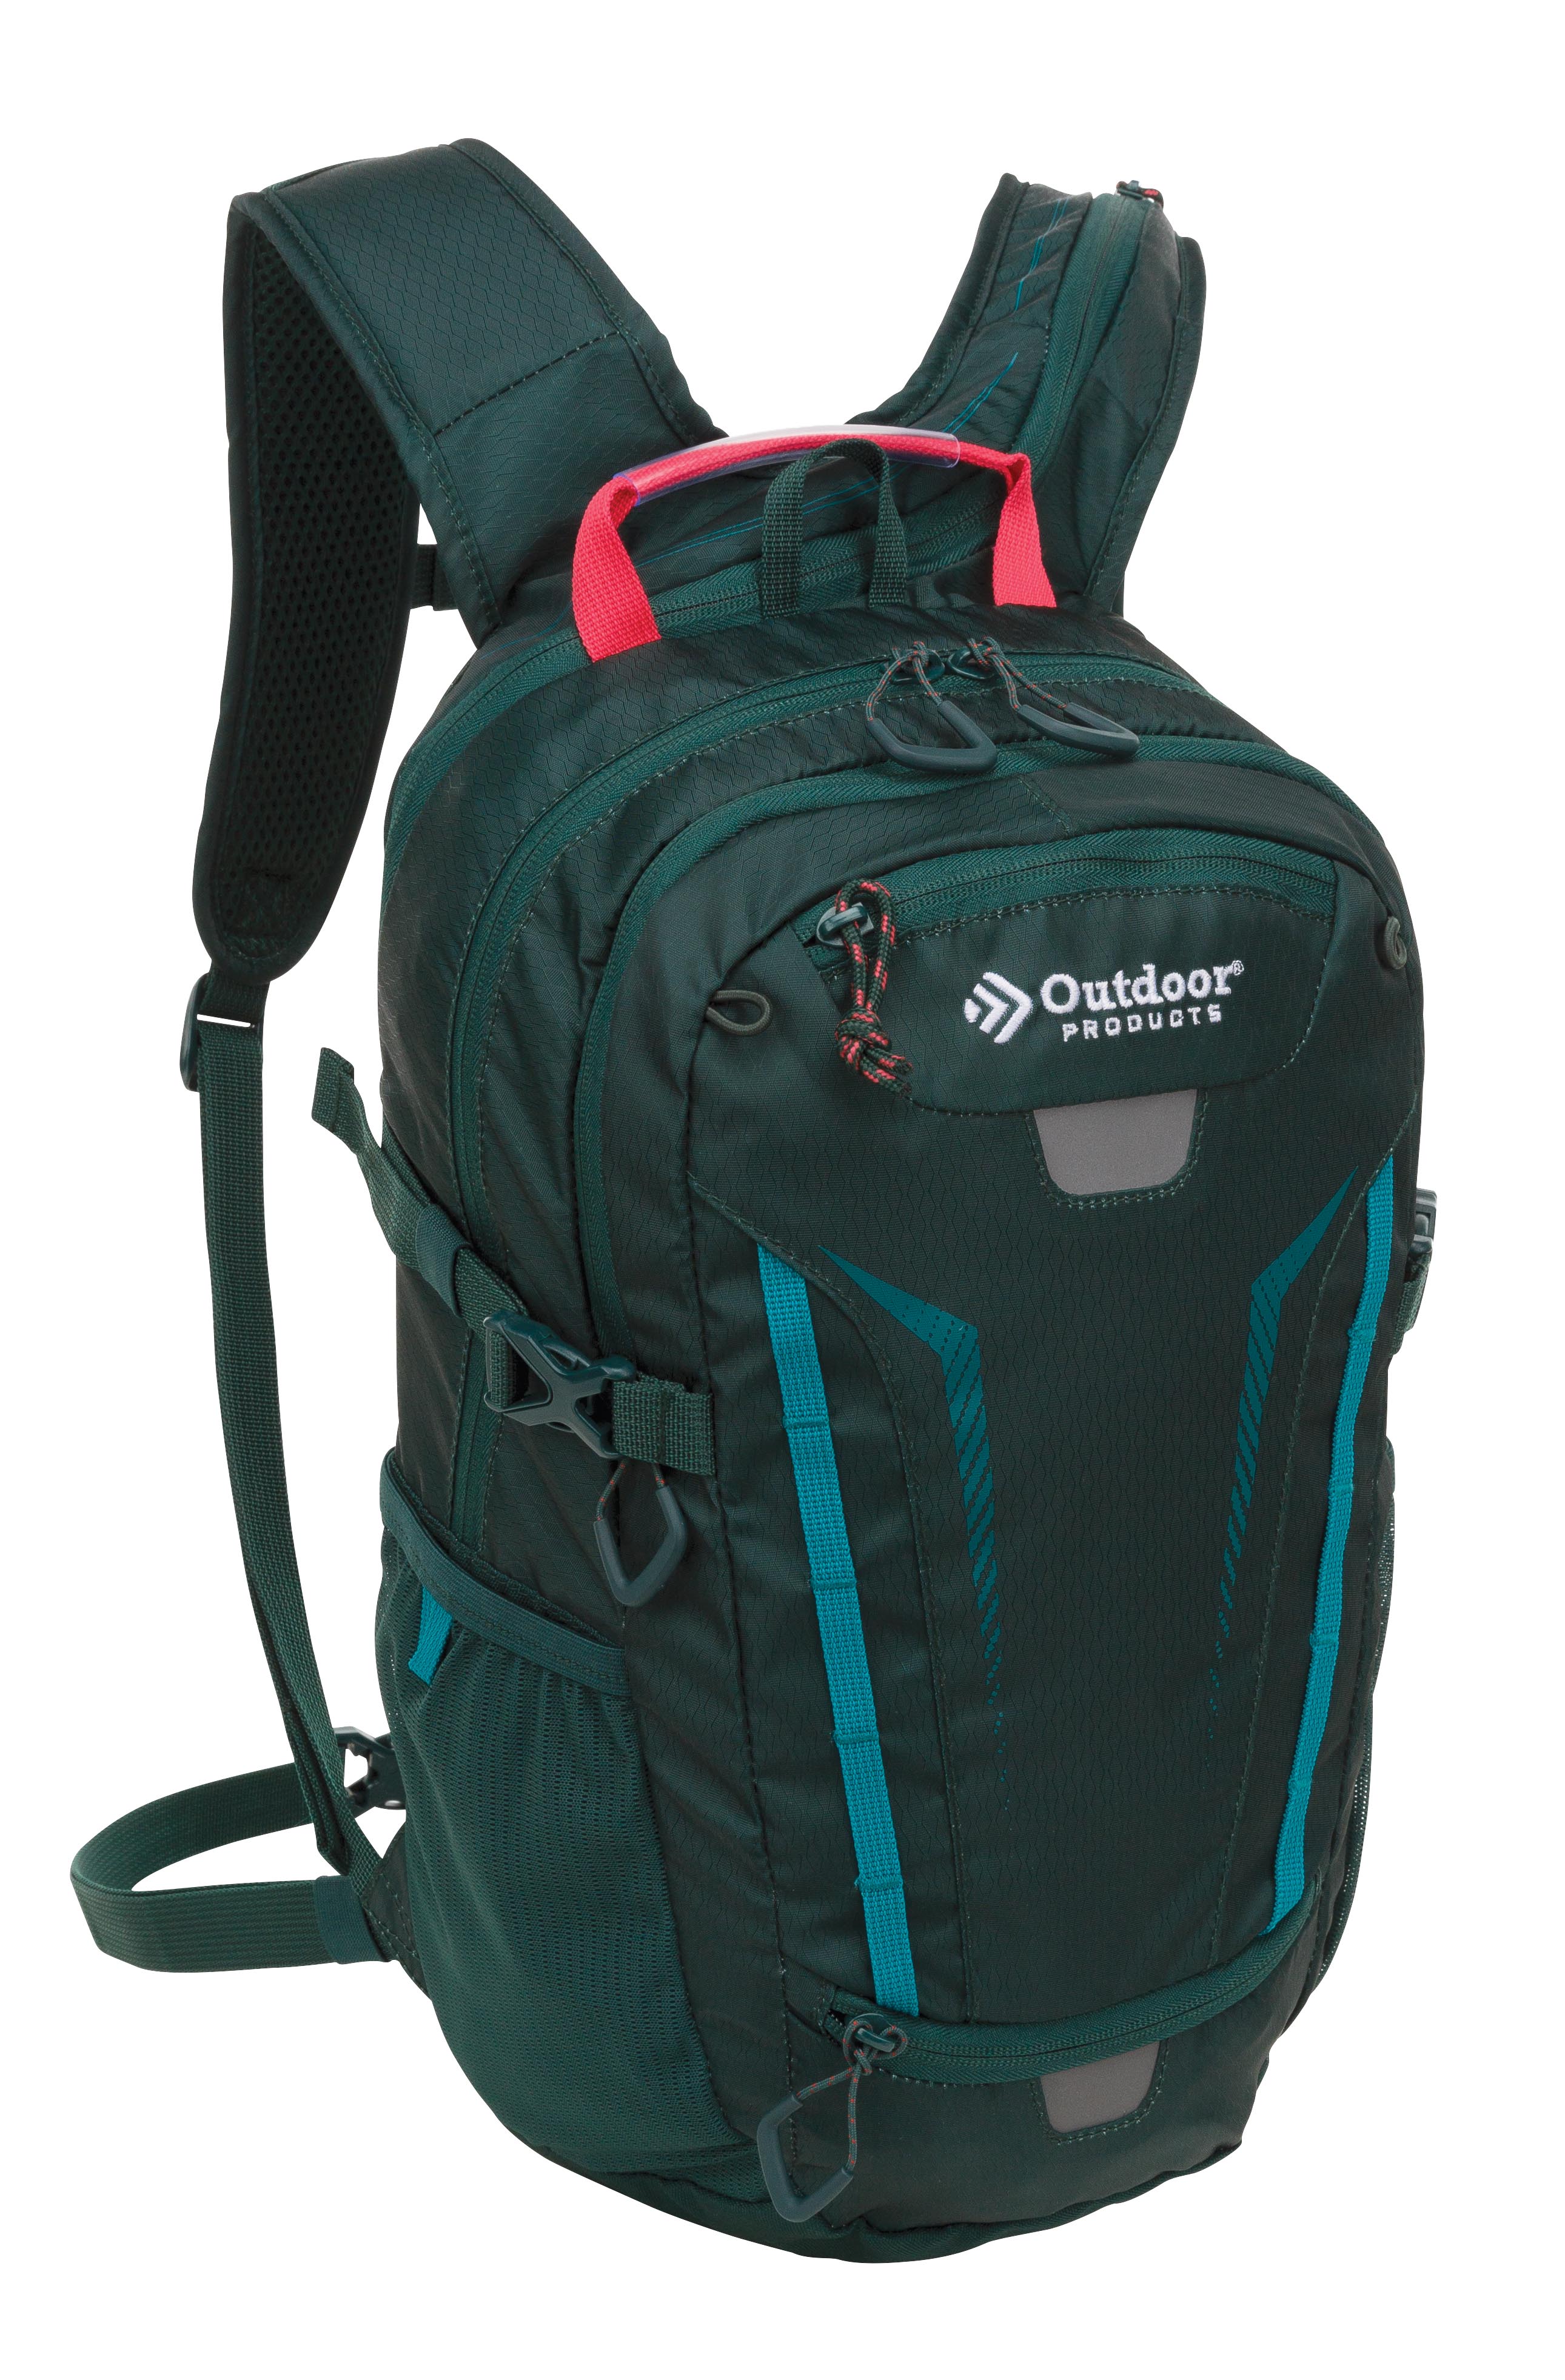 Outdoor Products 17 Ltr Deluxe Hydration Pack, with 2-Liter Reservoir, Green, Unisex, Lightweight - image 1 of 9